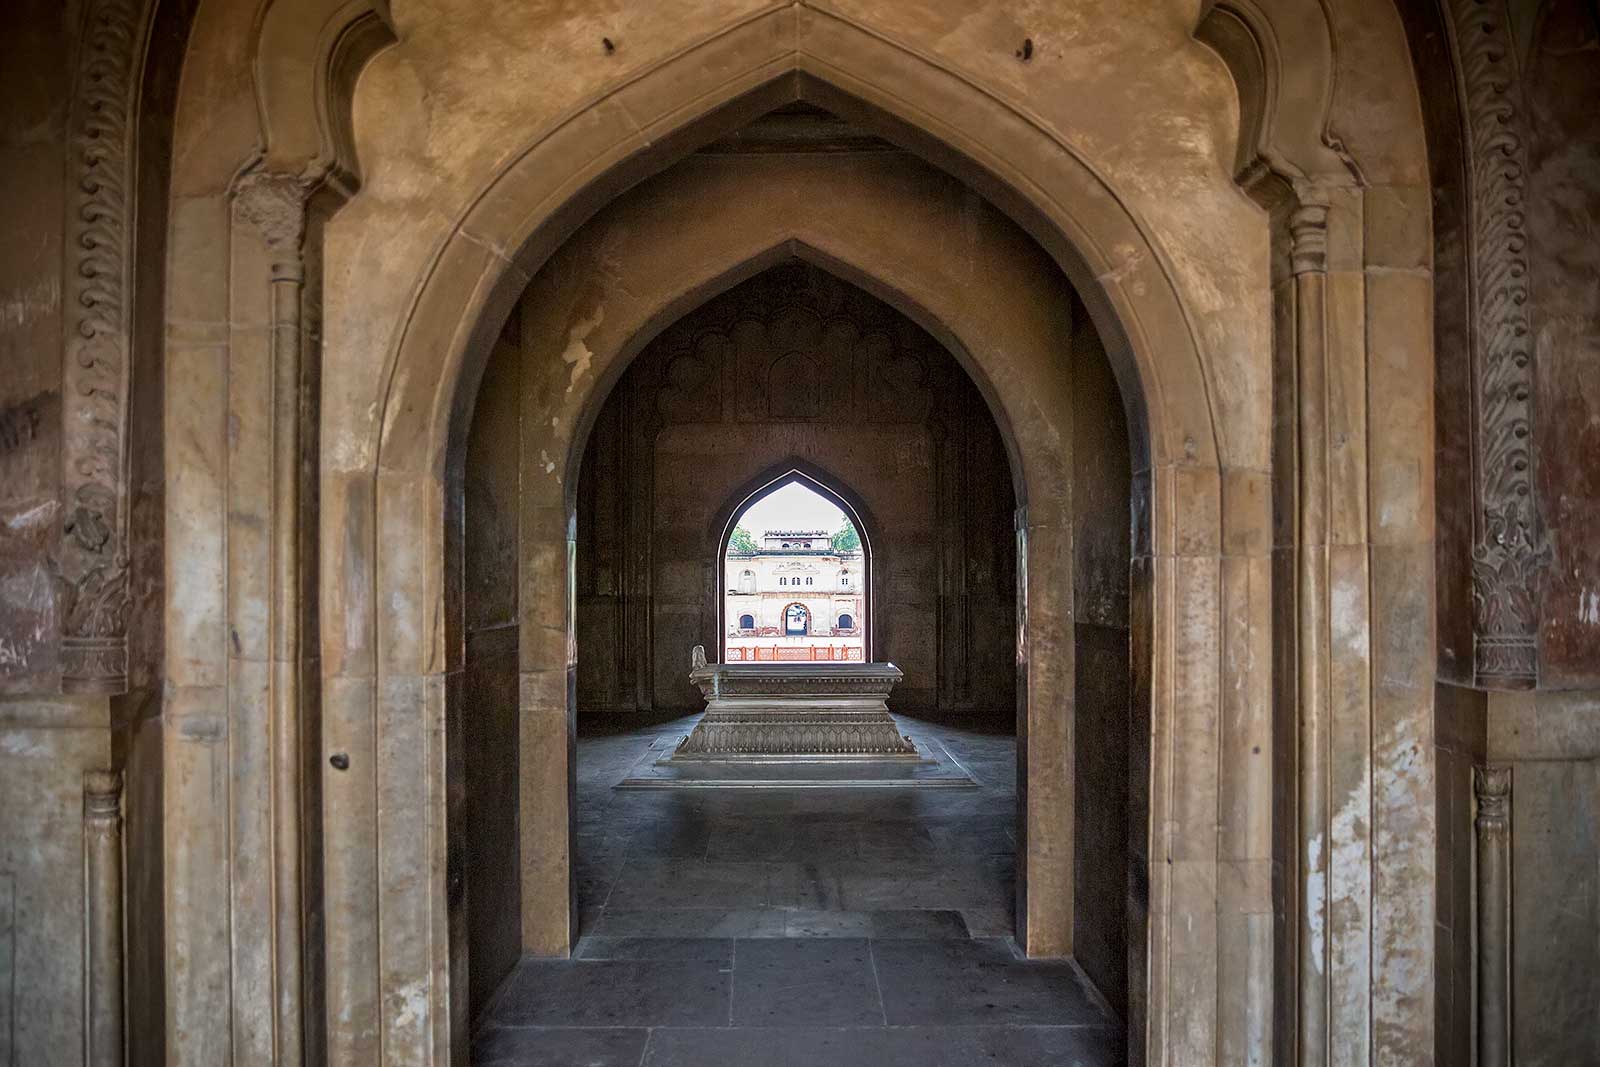 Safdarjung Tomb is the last monumental tomb garden of the Mughals.